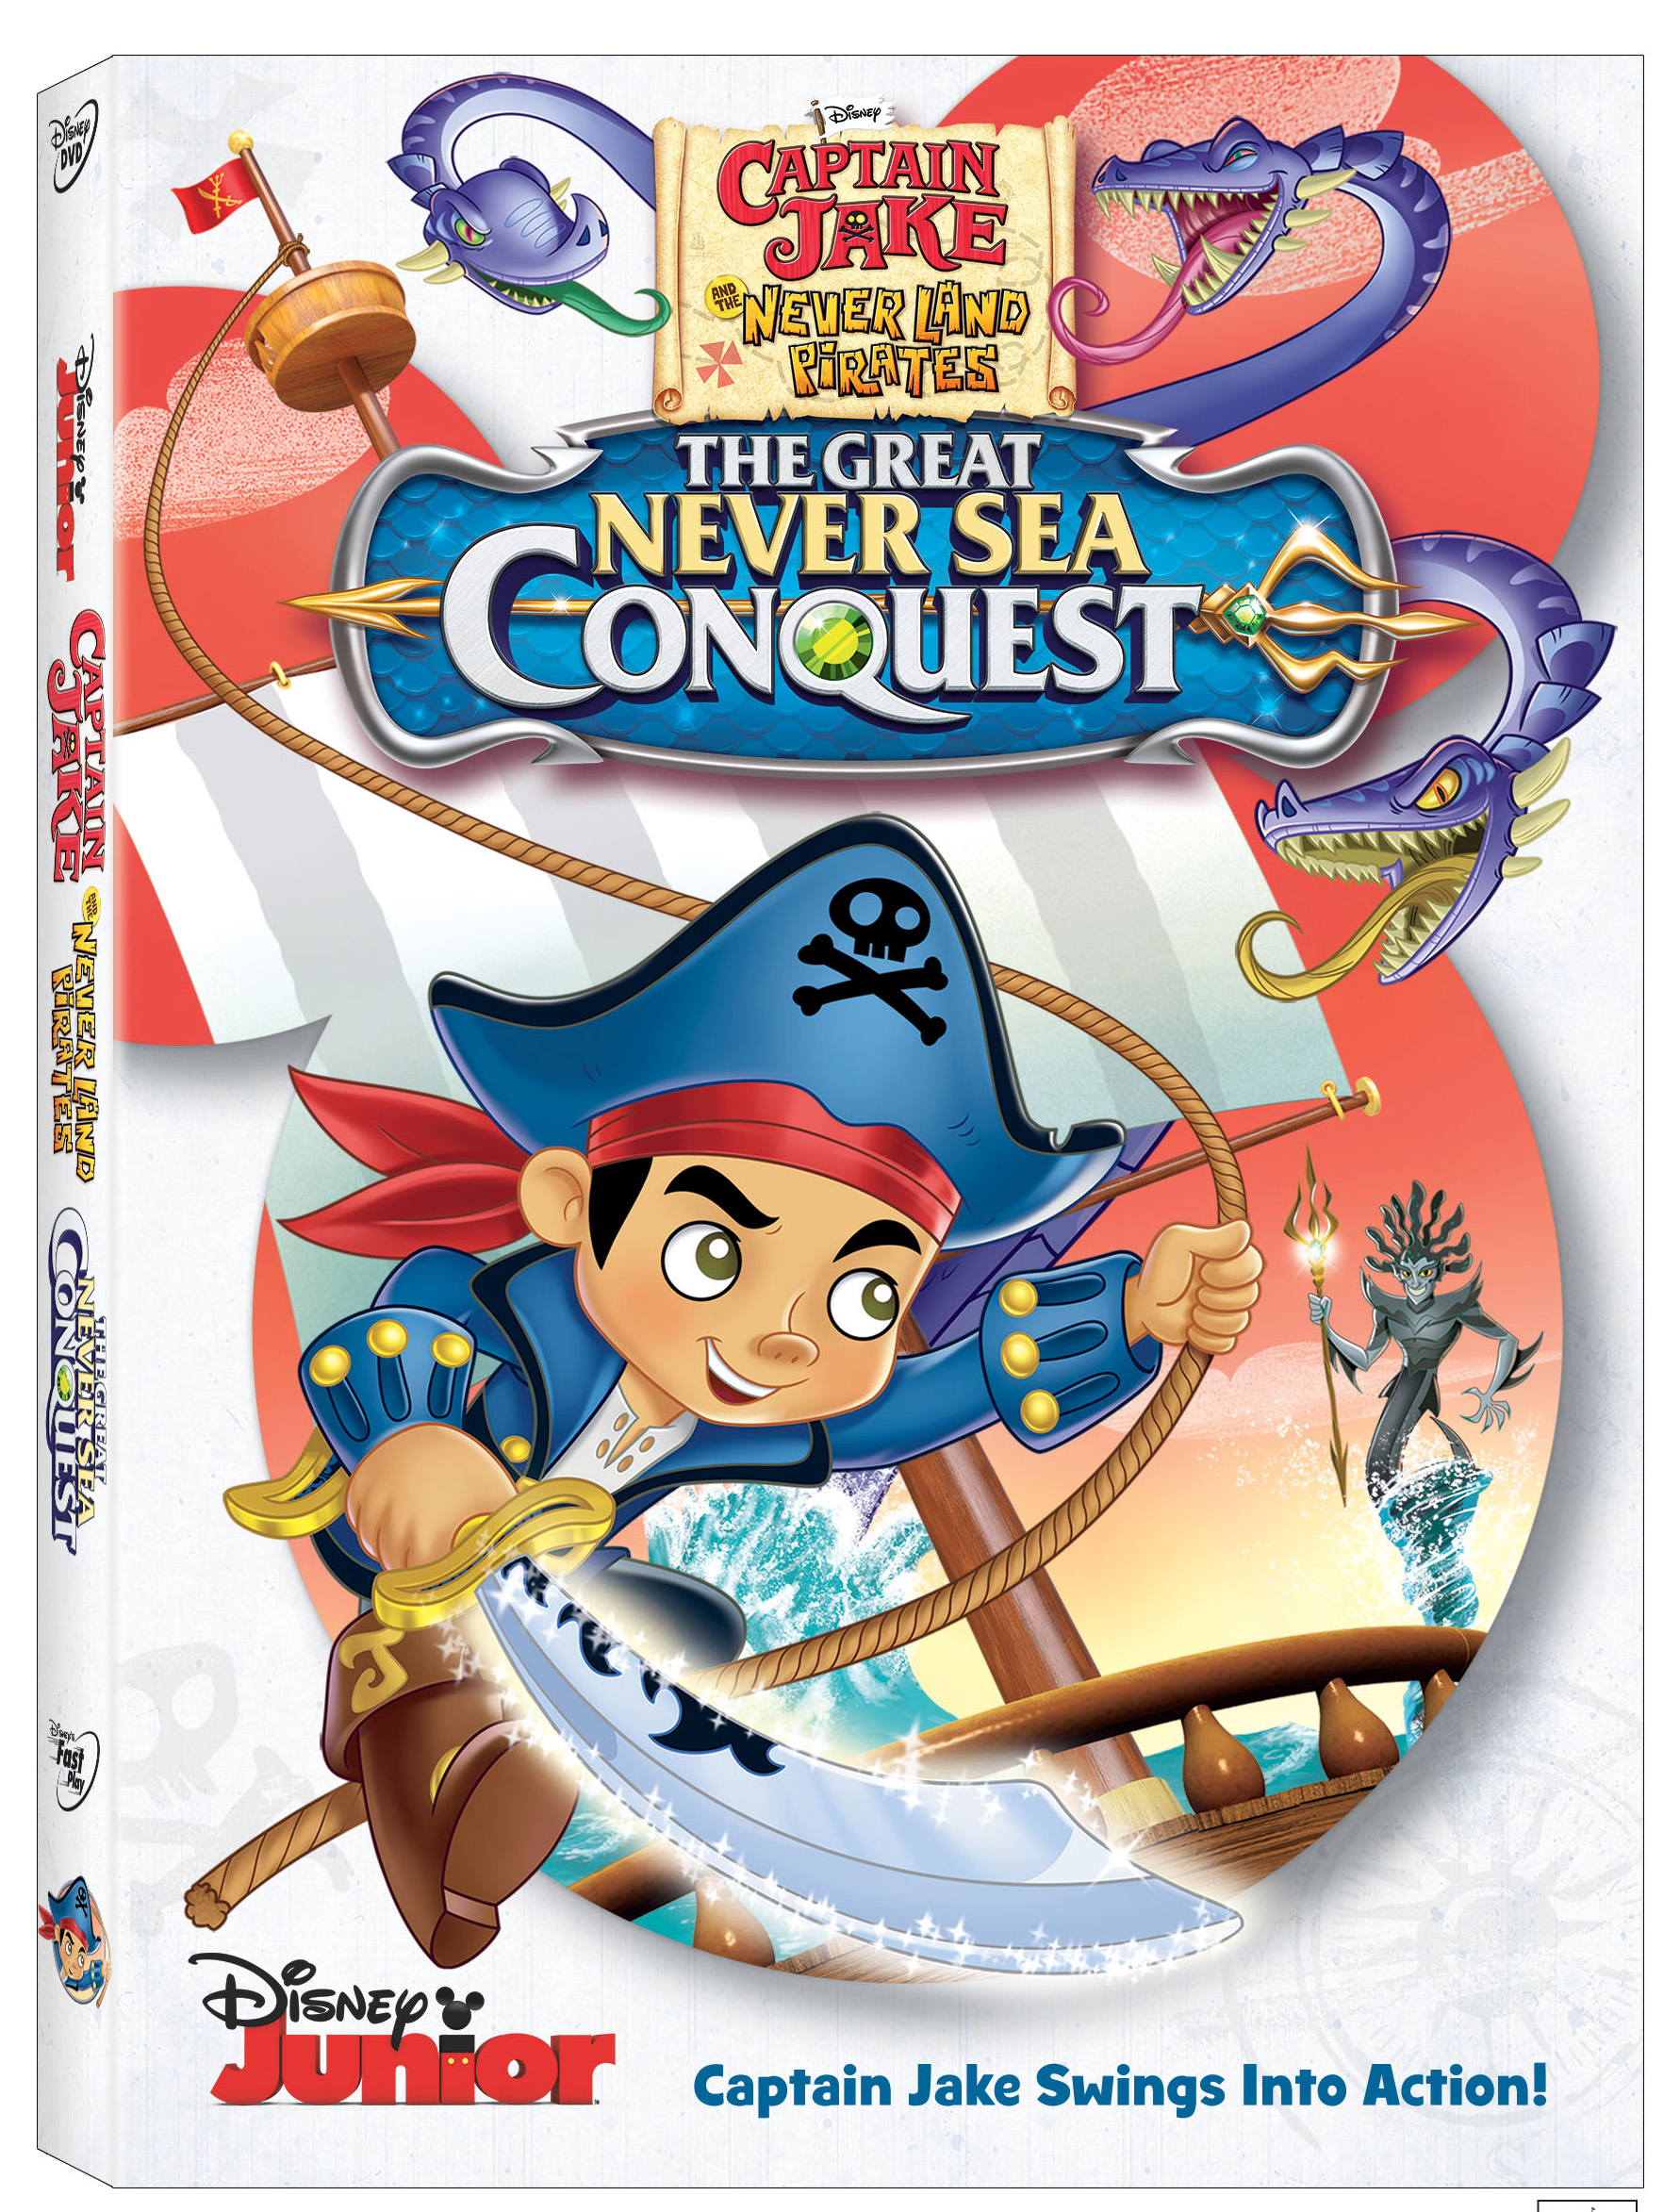 ‘Captain Jake and the Never Land Pirates: The Great Never Sea Conquest’ Heads to DVD 1/12